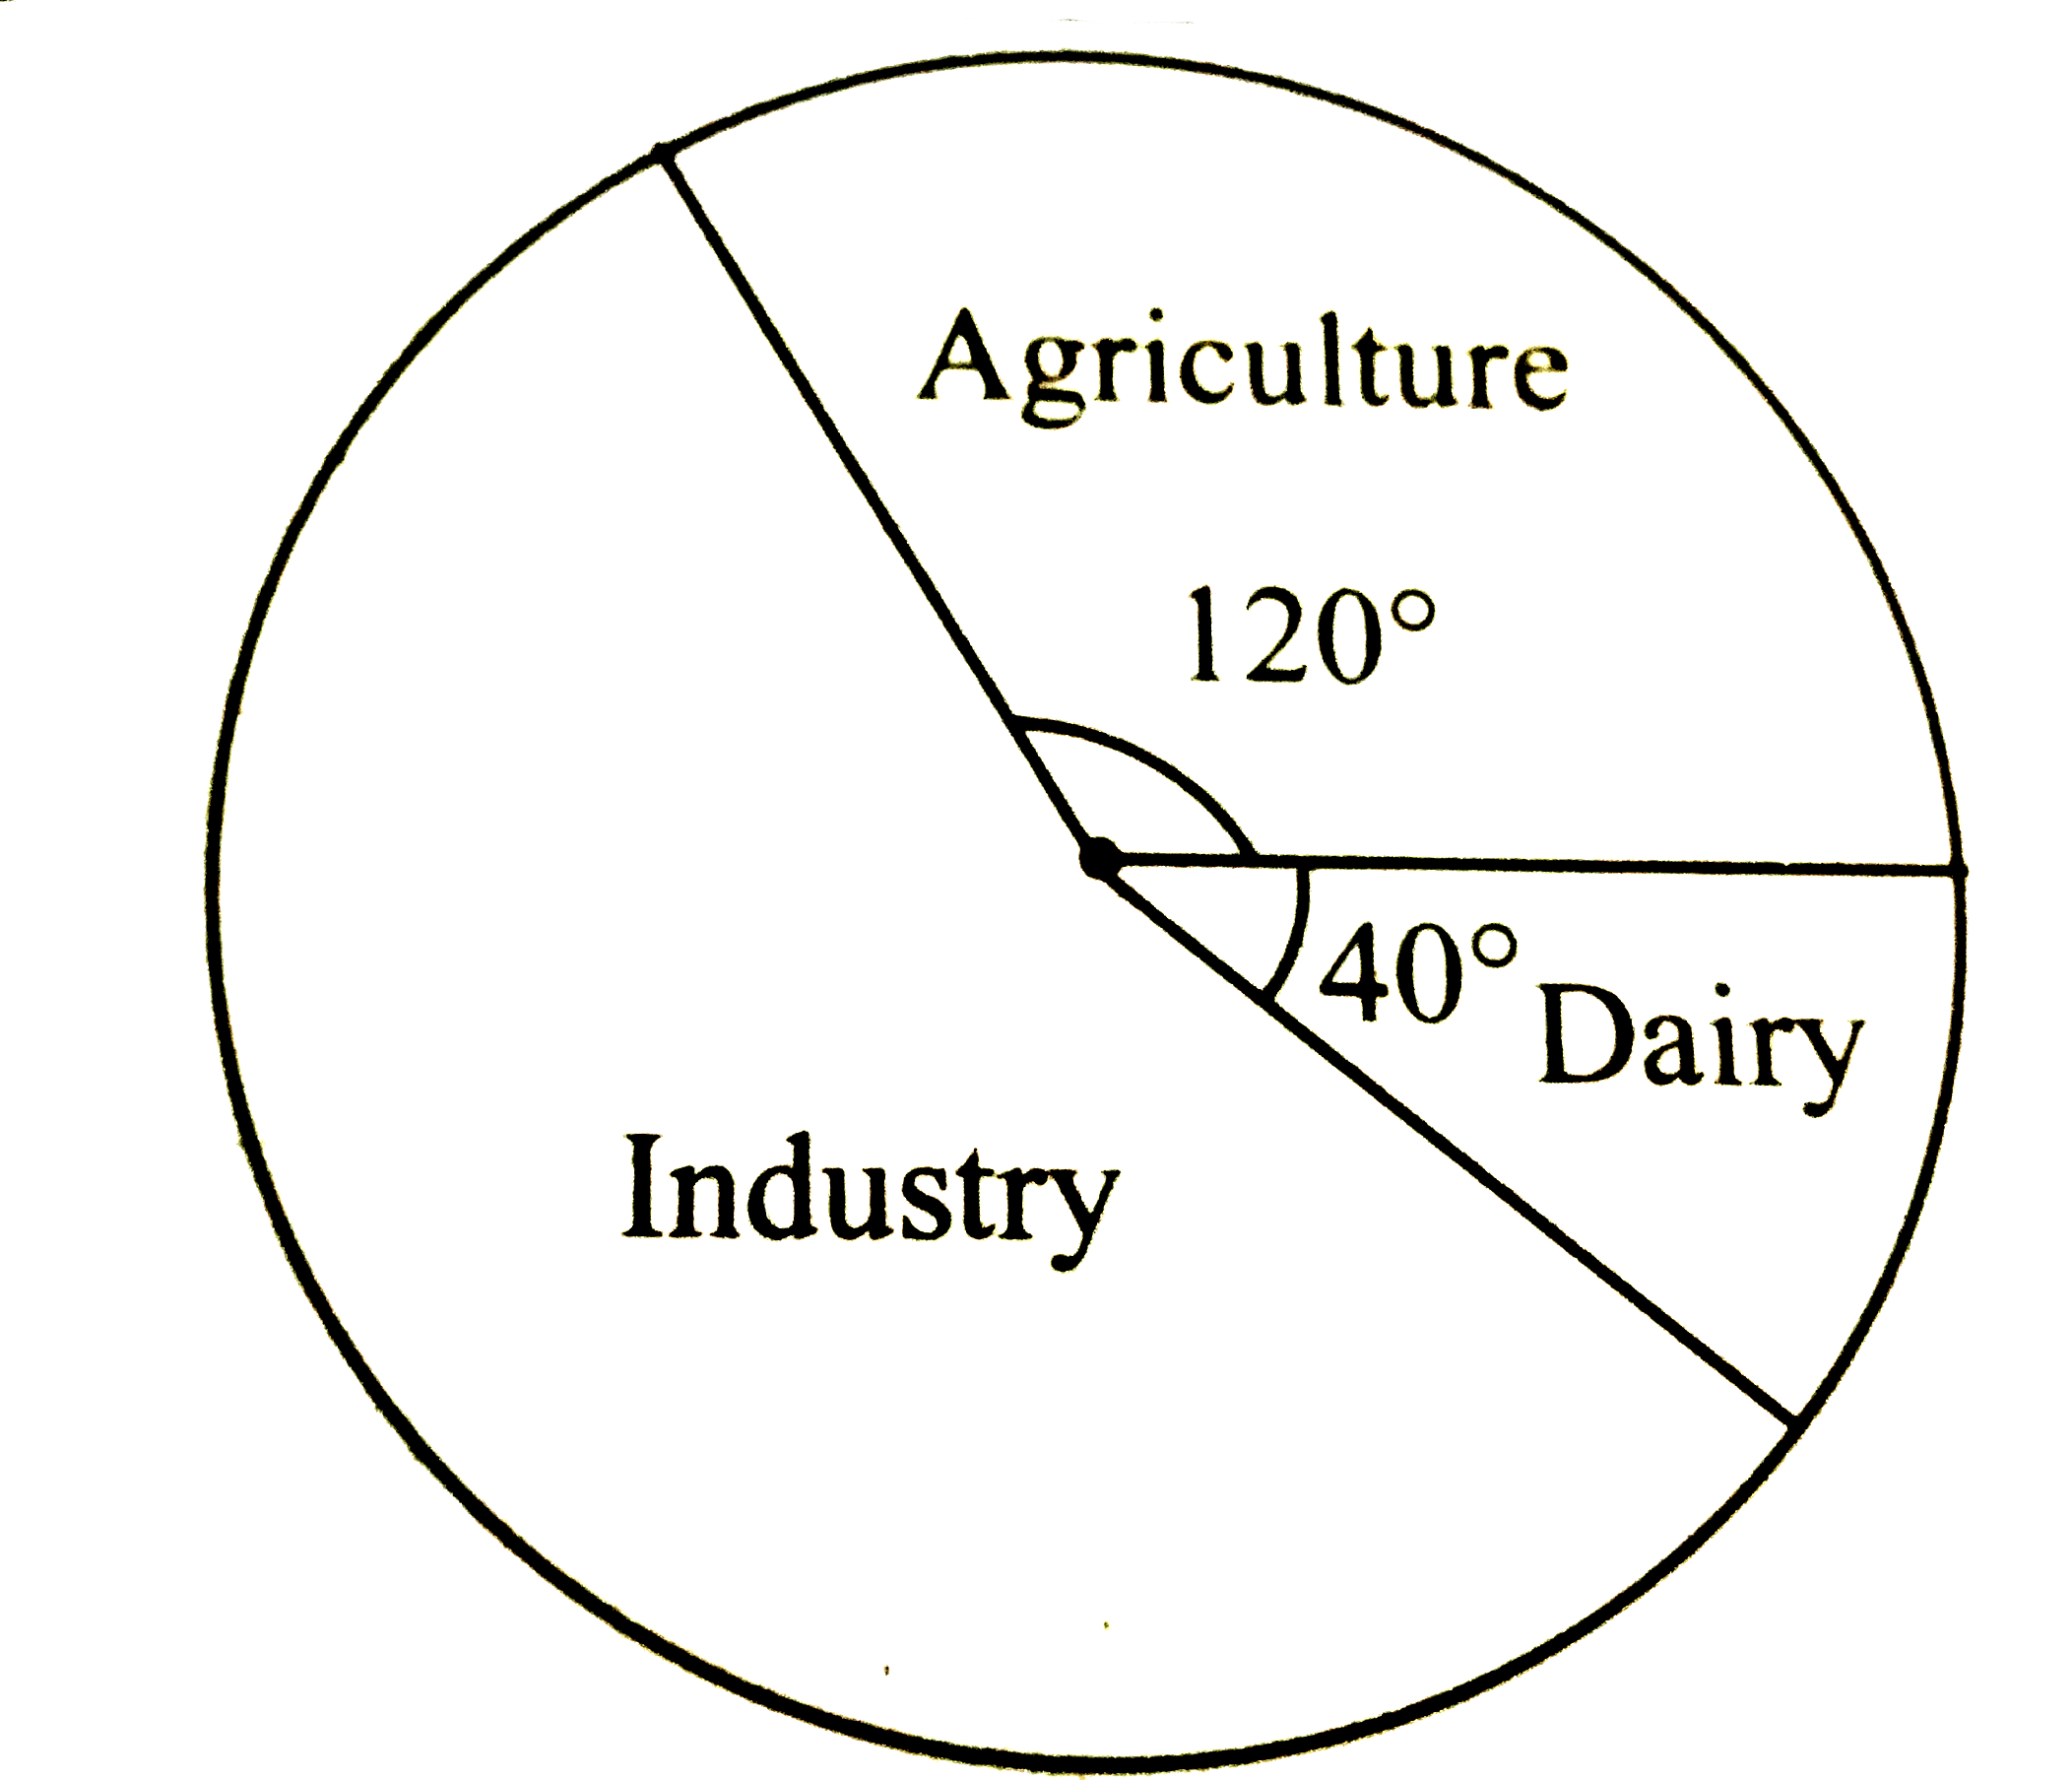 The following pie diagram represents the sectorwise loan amount in crores of rupees distributied by a bank. From the information answer the following questions:   i. If the dairy sector receives Rs20 crores, then find the total loan disbursed.   ii. Find the loan amount for agriculture sector and also for idustrial sector.   iii How much additional amount did industrial sector receive than agriculture sector?